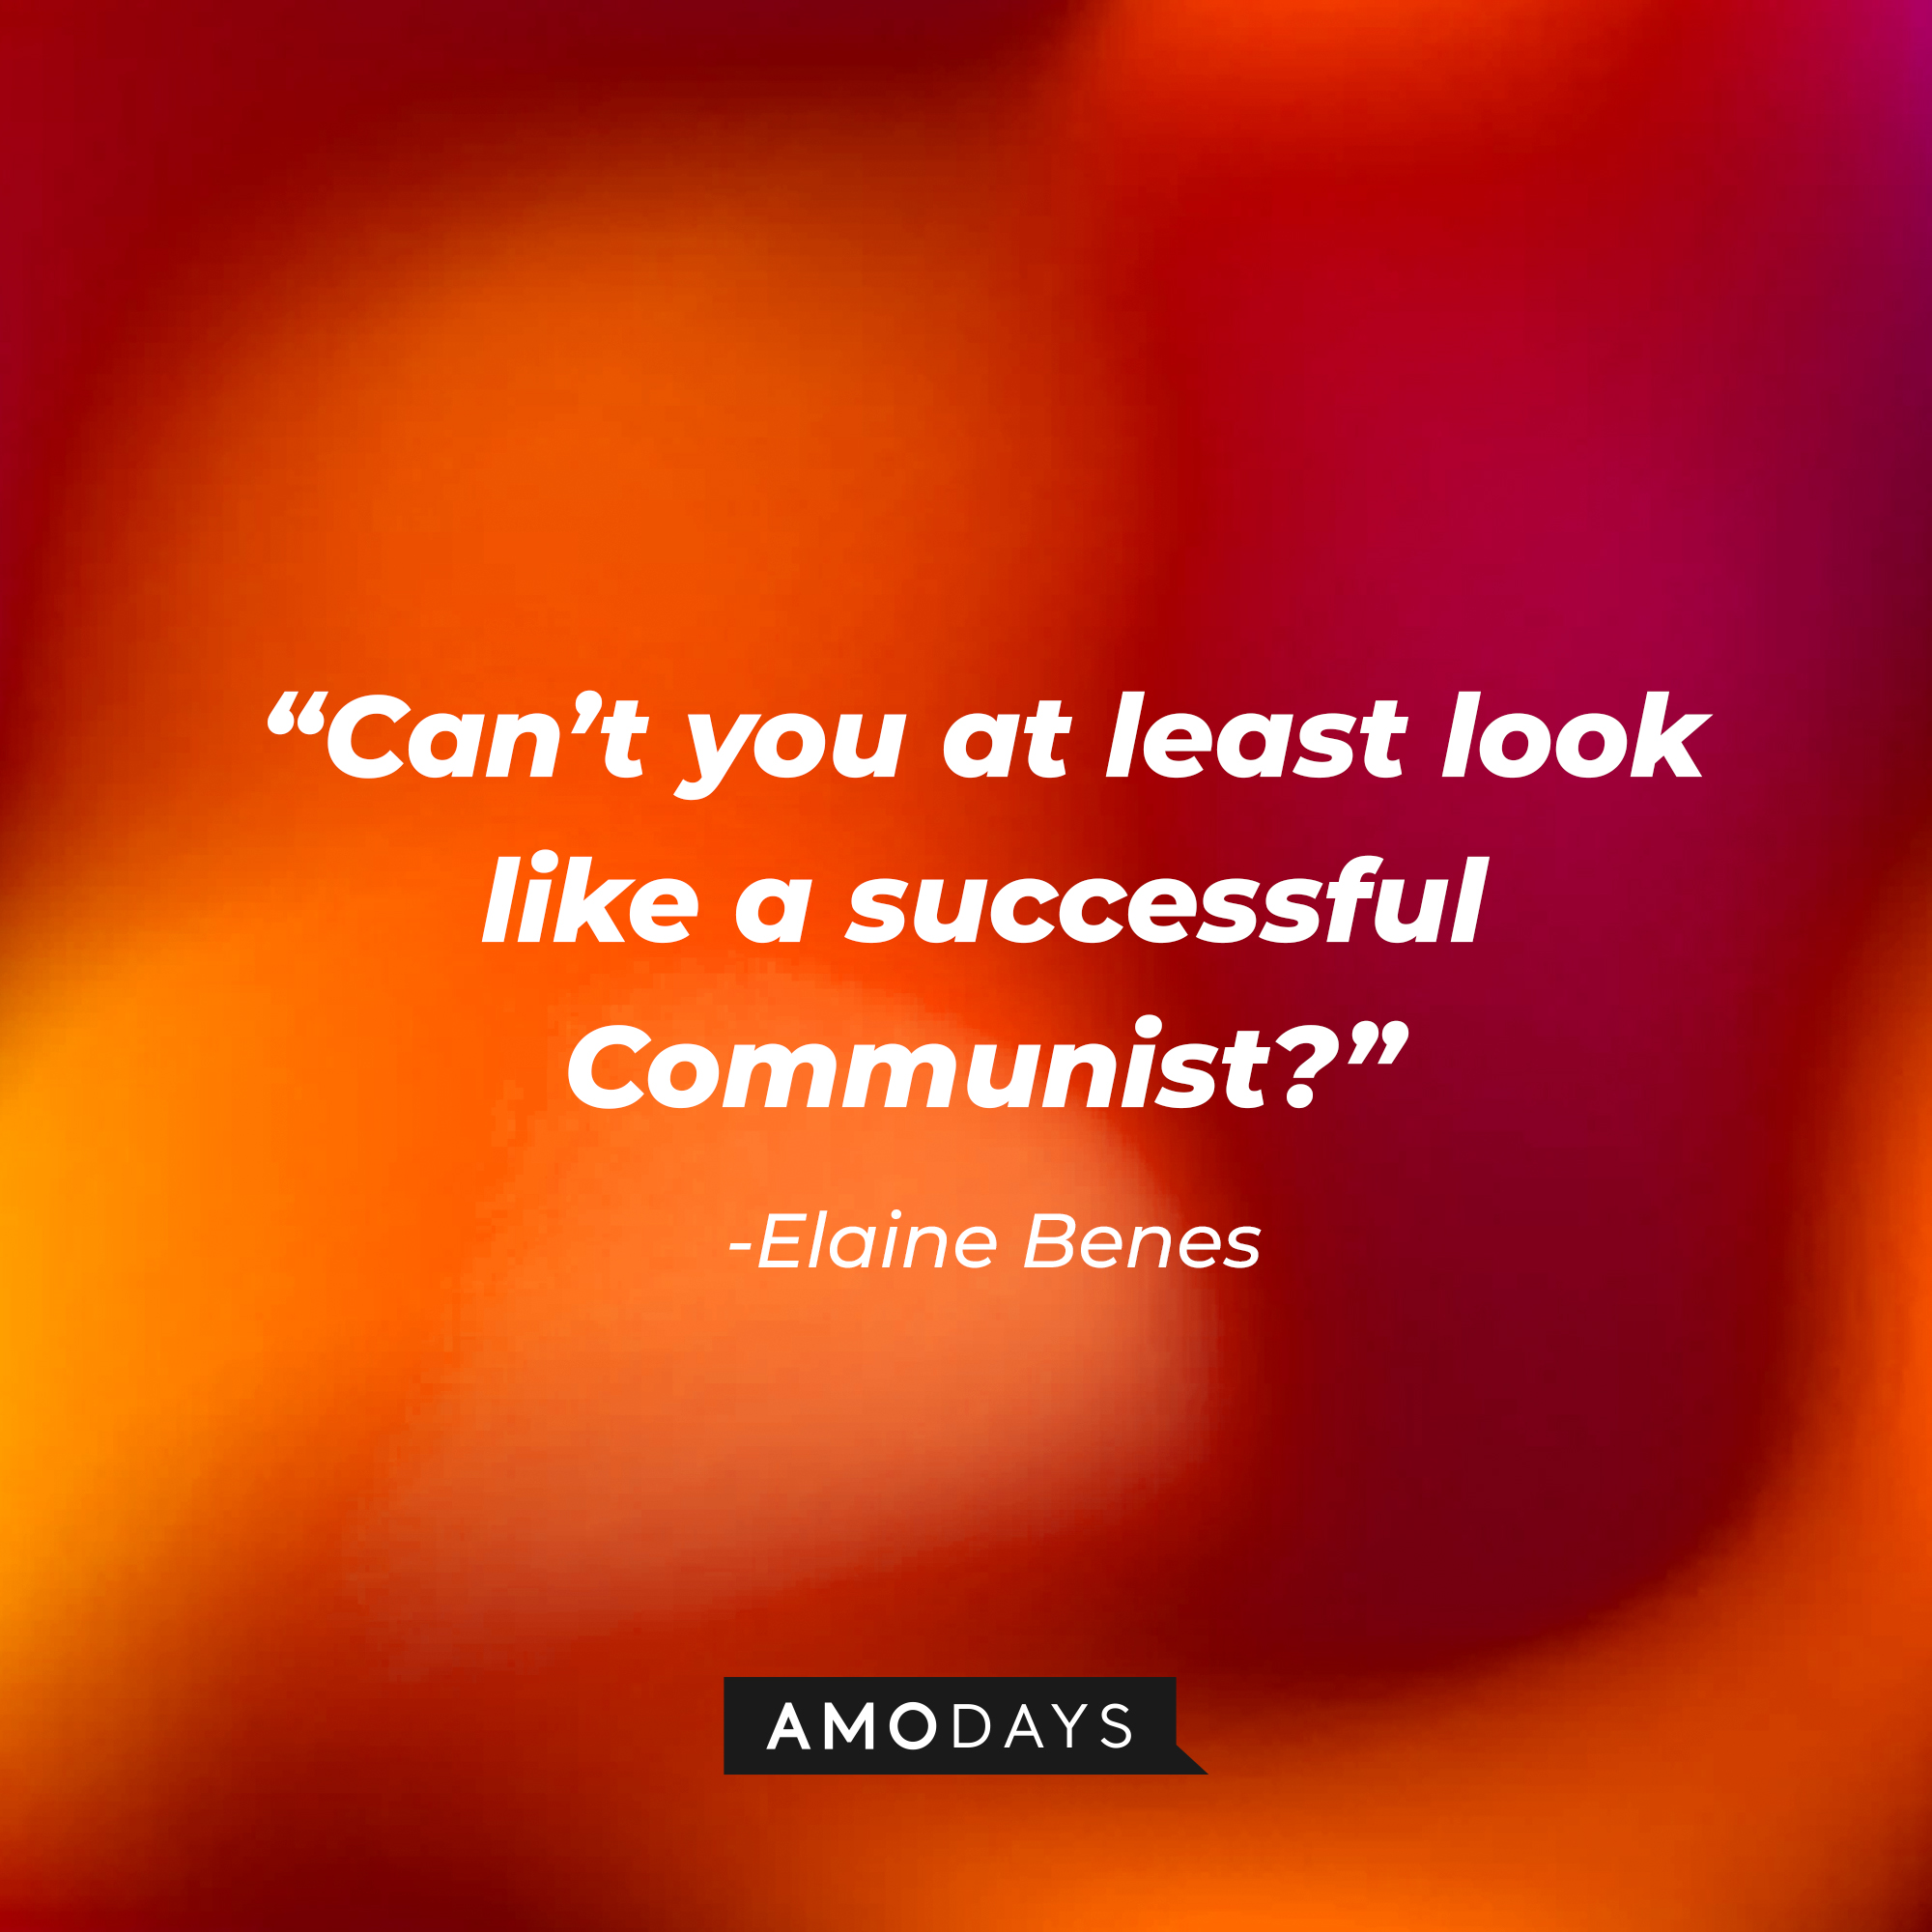 Elaine Benes’ quote: “Can’t you at least look like a successful Communist?” | Source: Amodays